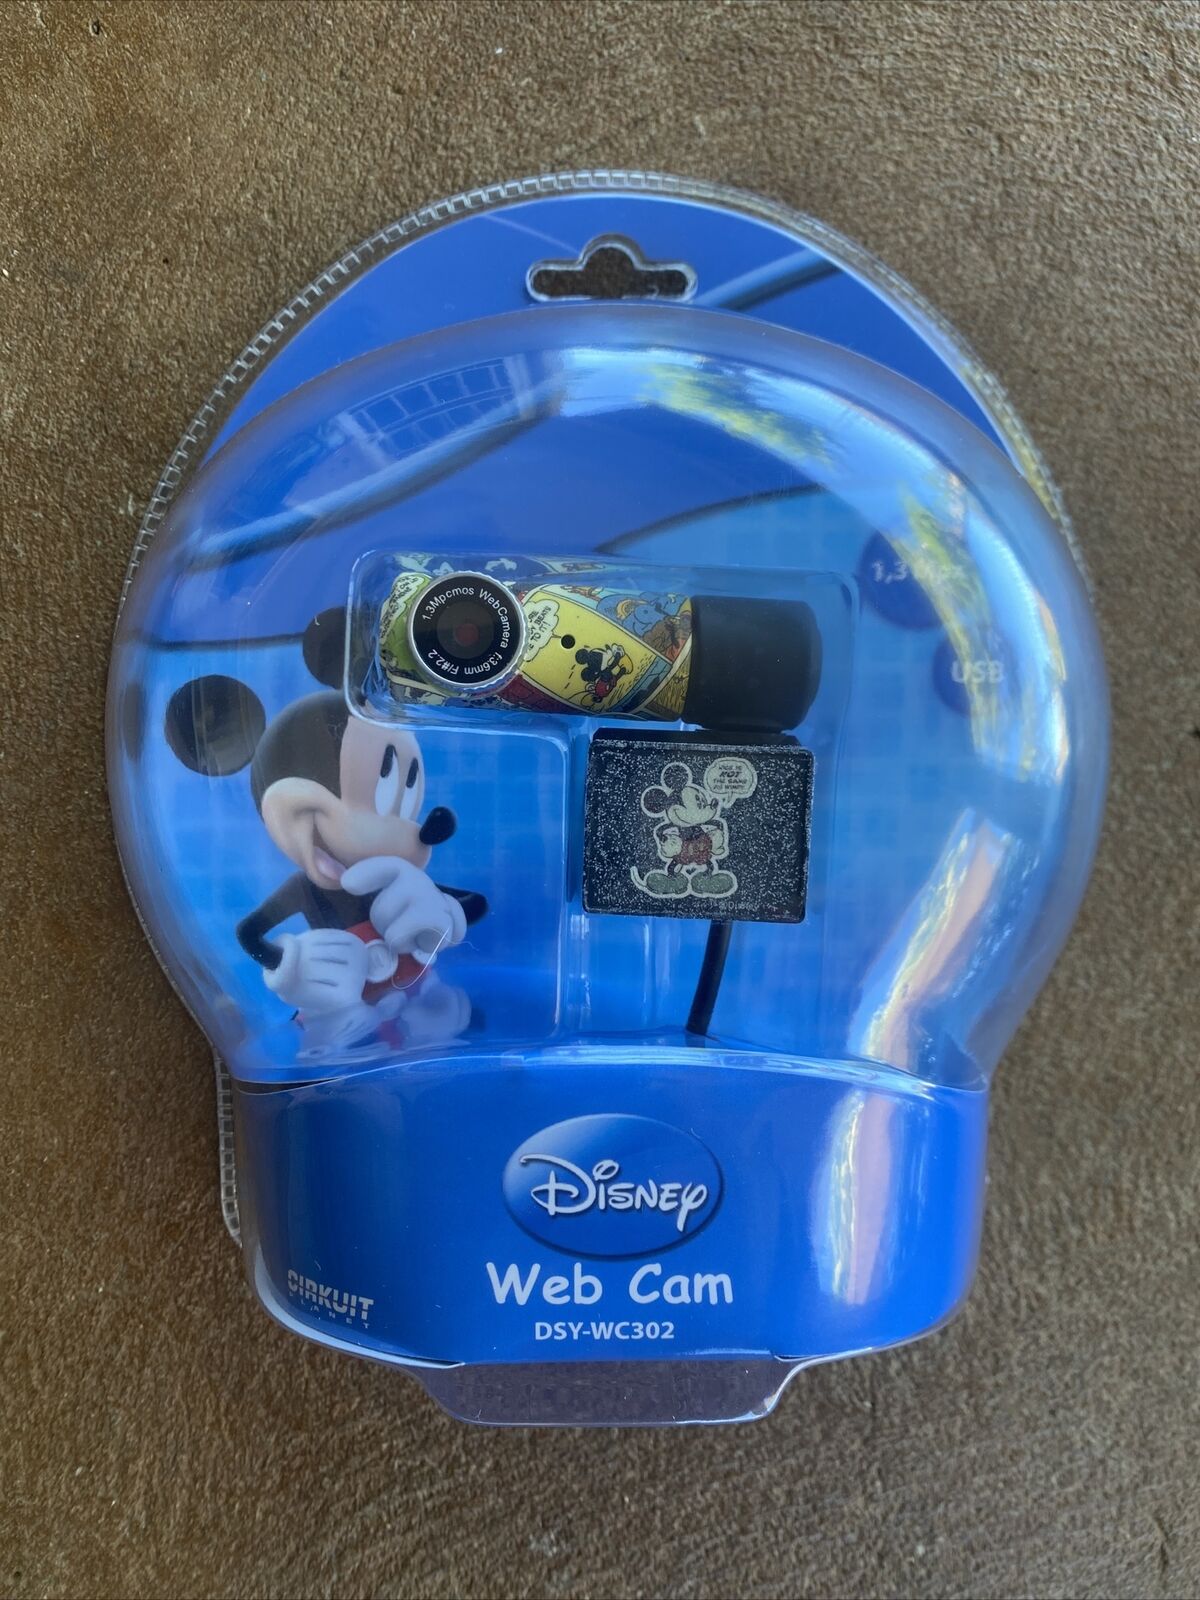 Cirkuit Planet Disney Webcam DSY-WC302 USB NEW SEALED OLD STOCK MICKEY MOUSE